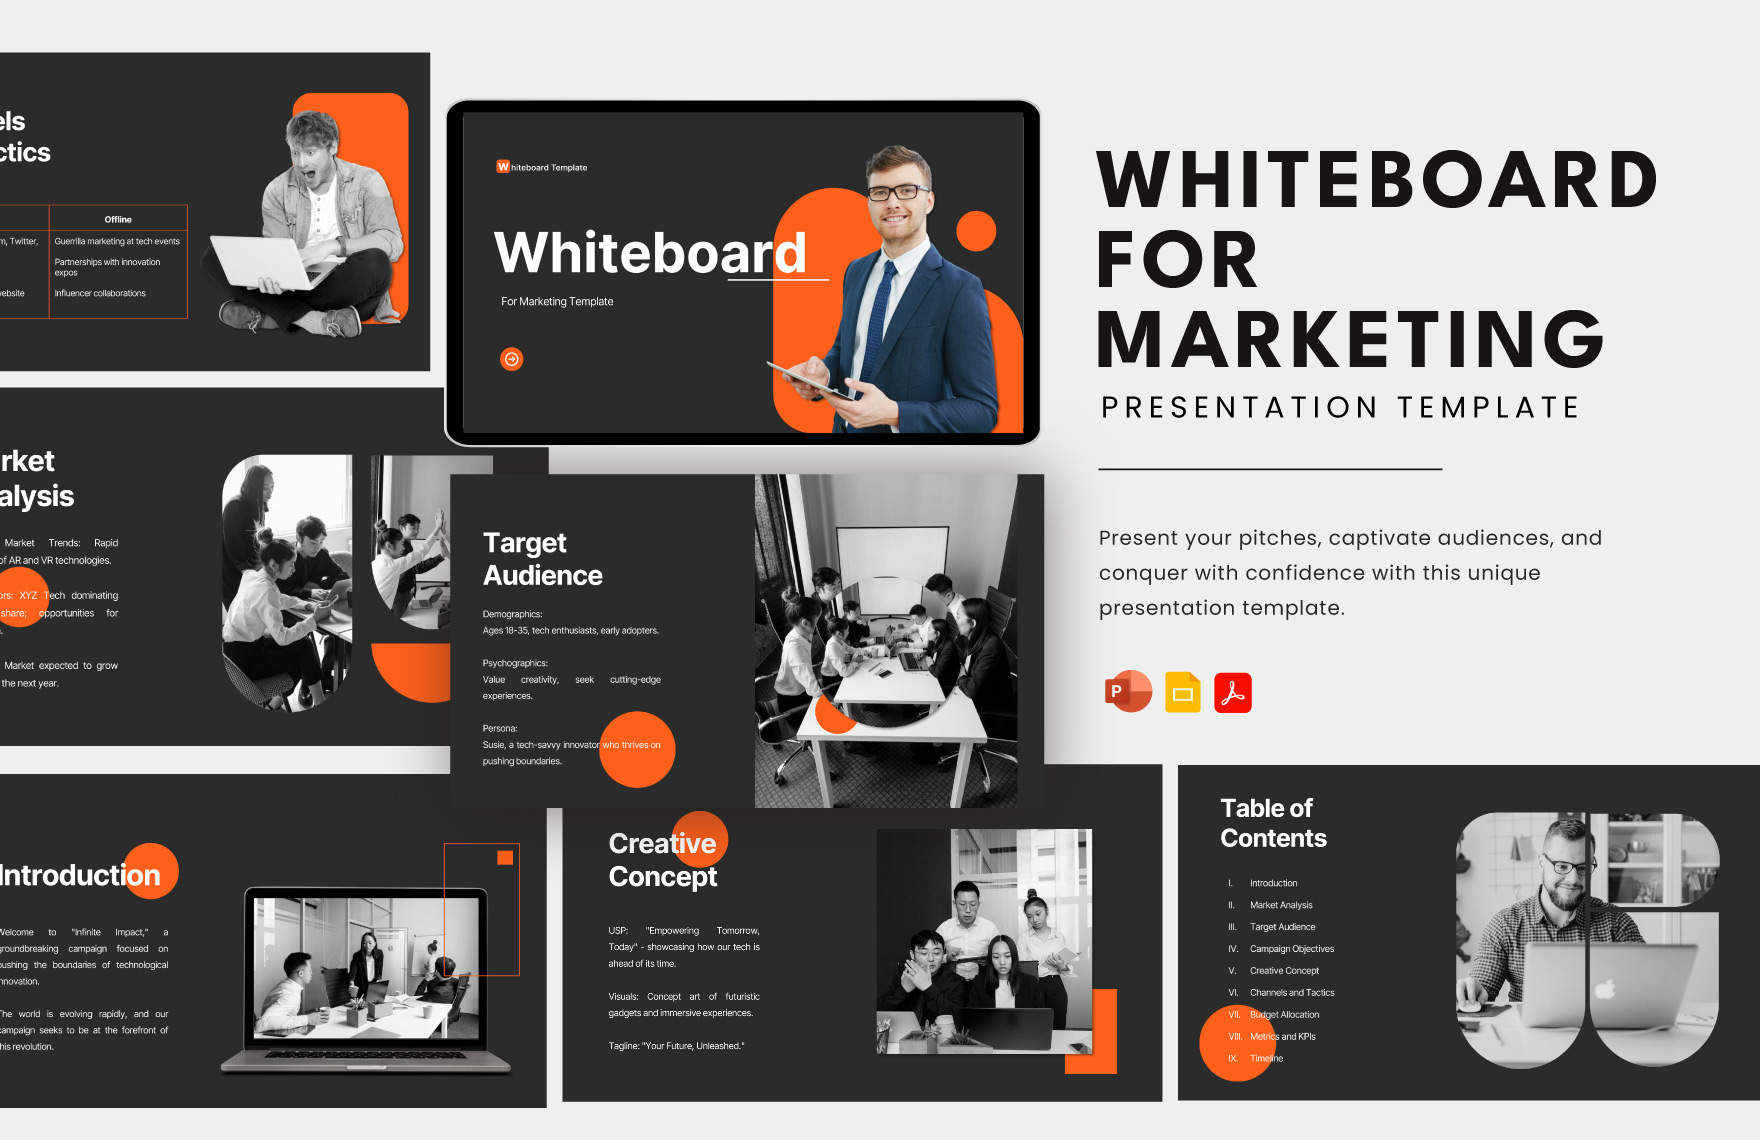 Whiteboard for Marketing Template